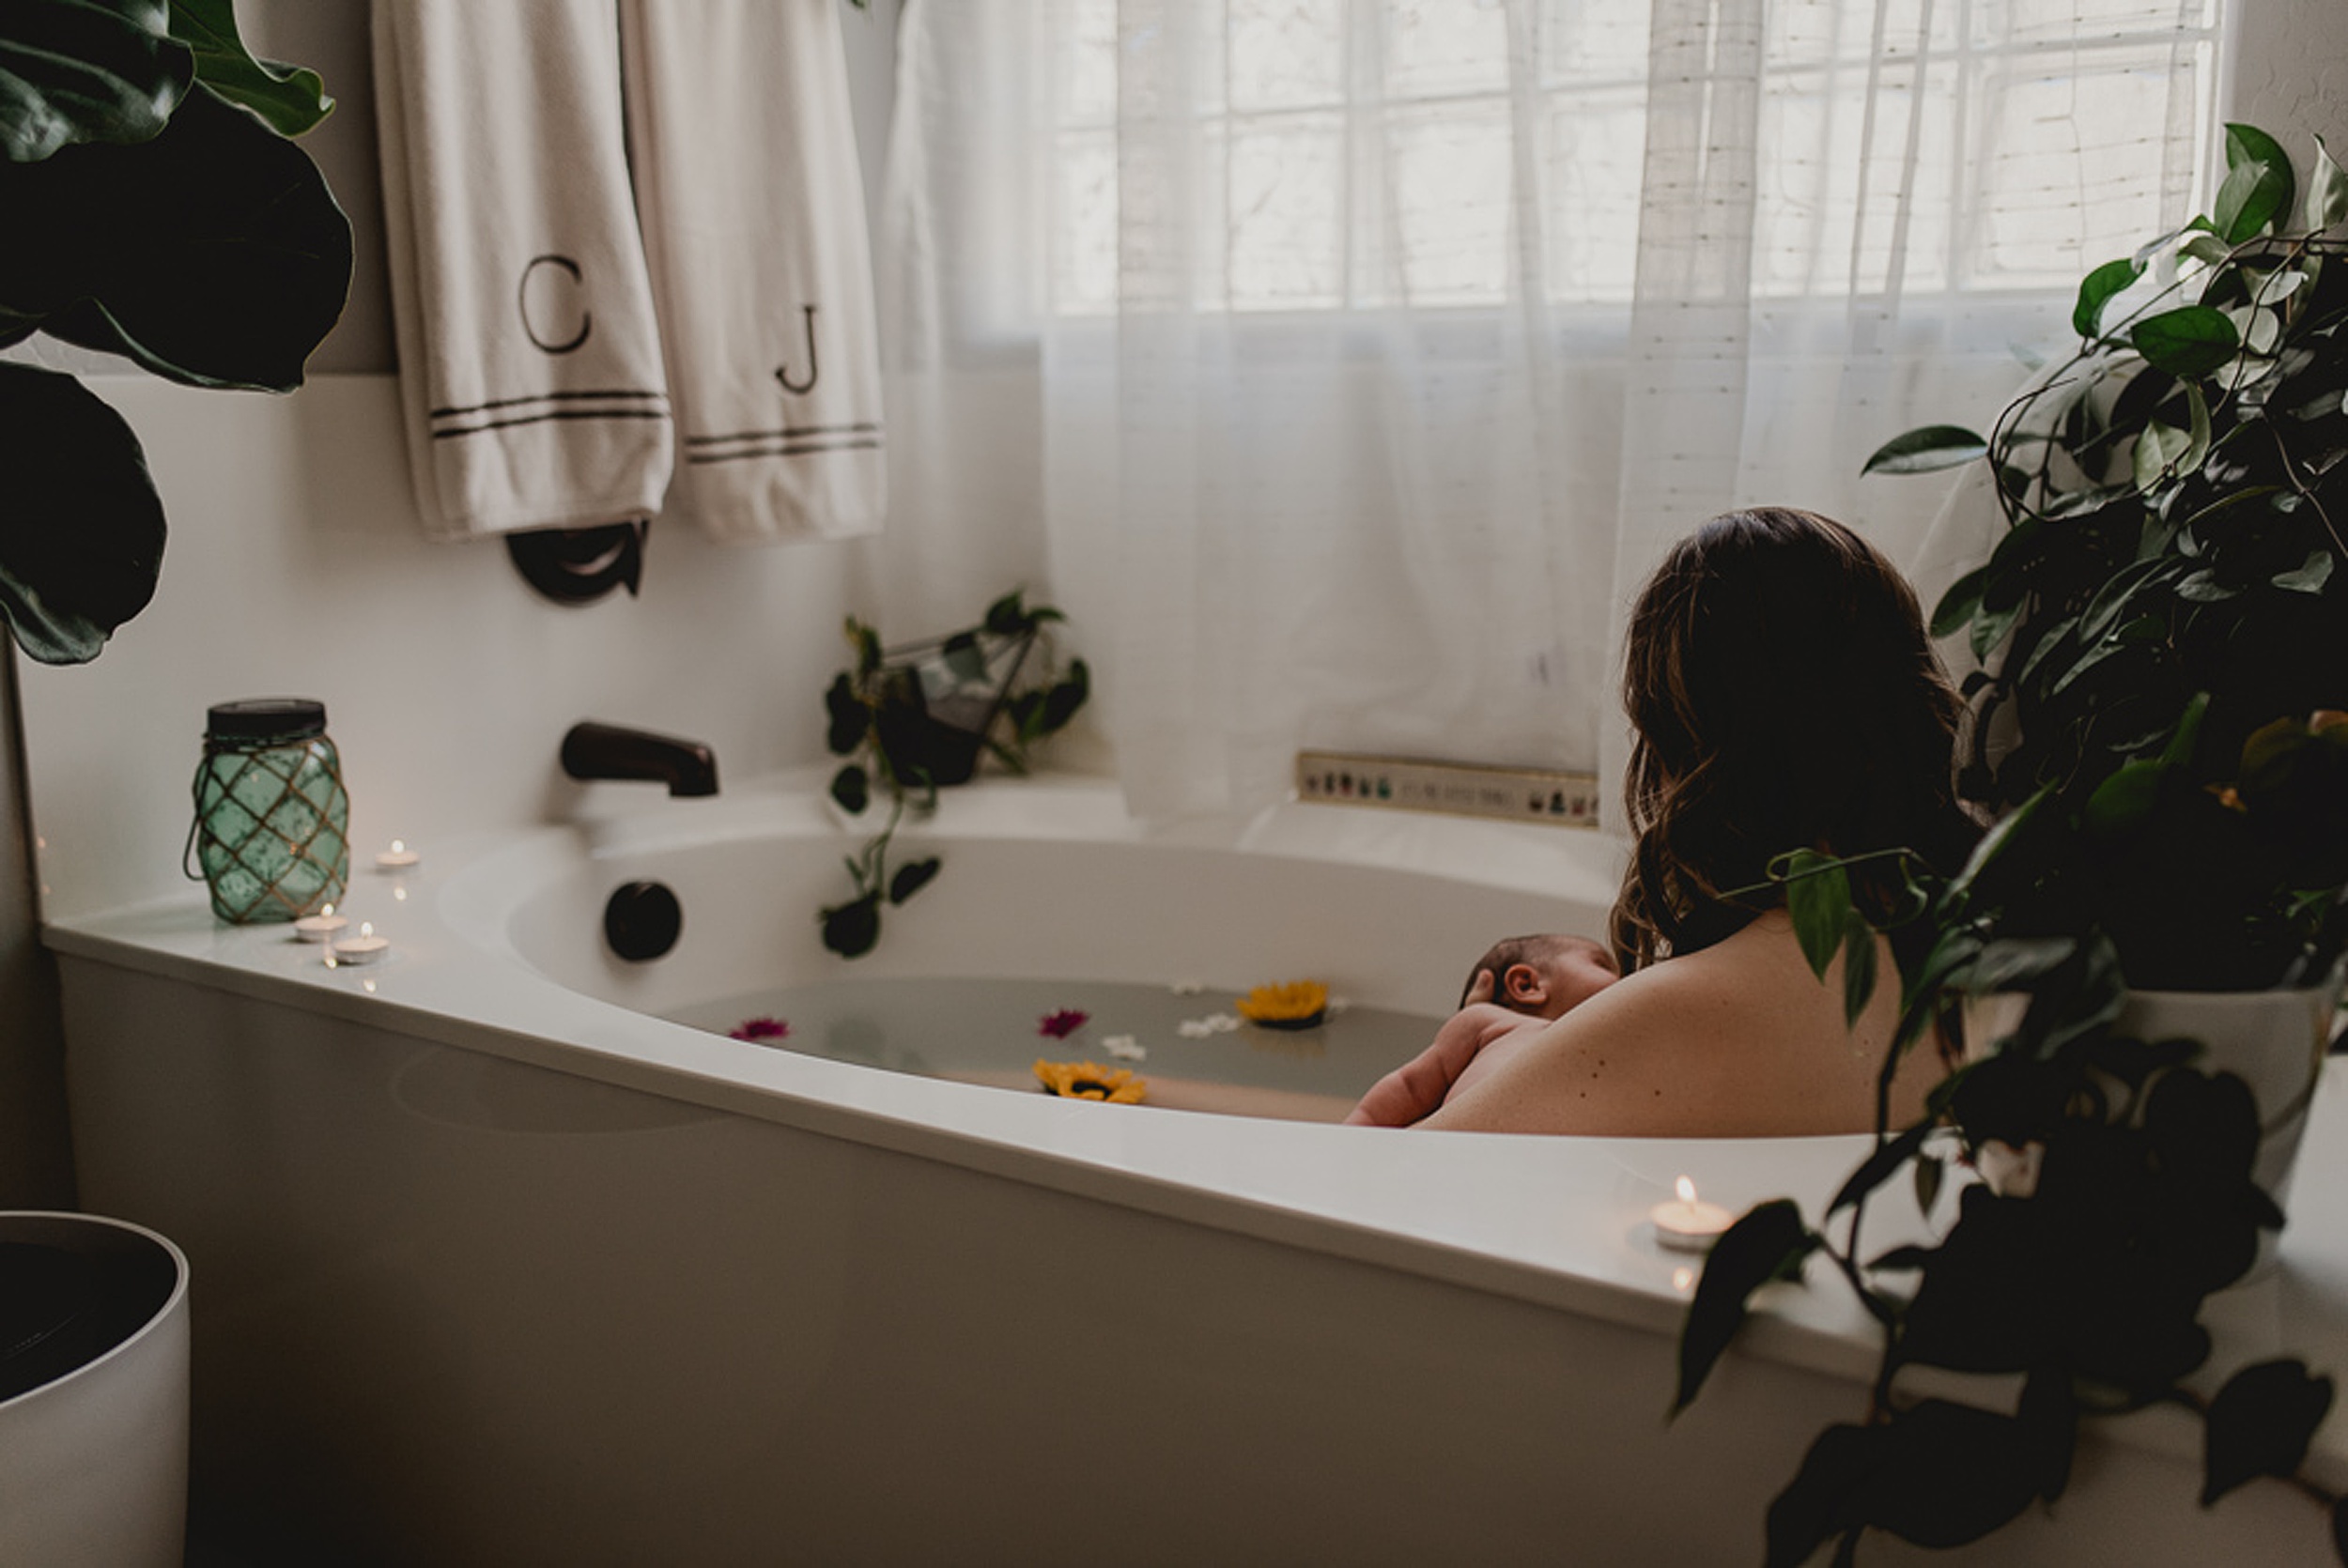 A look at a mom breastfeeding her newborn baby while taking a bath with houseplants under a window